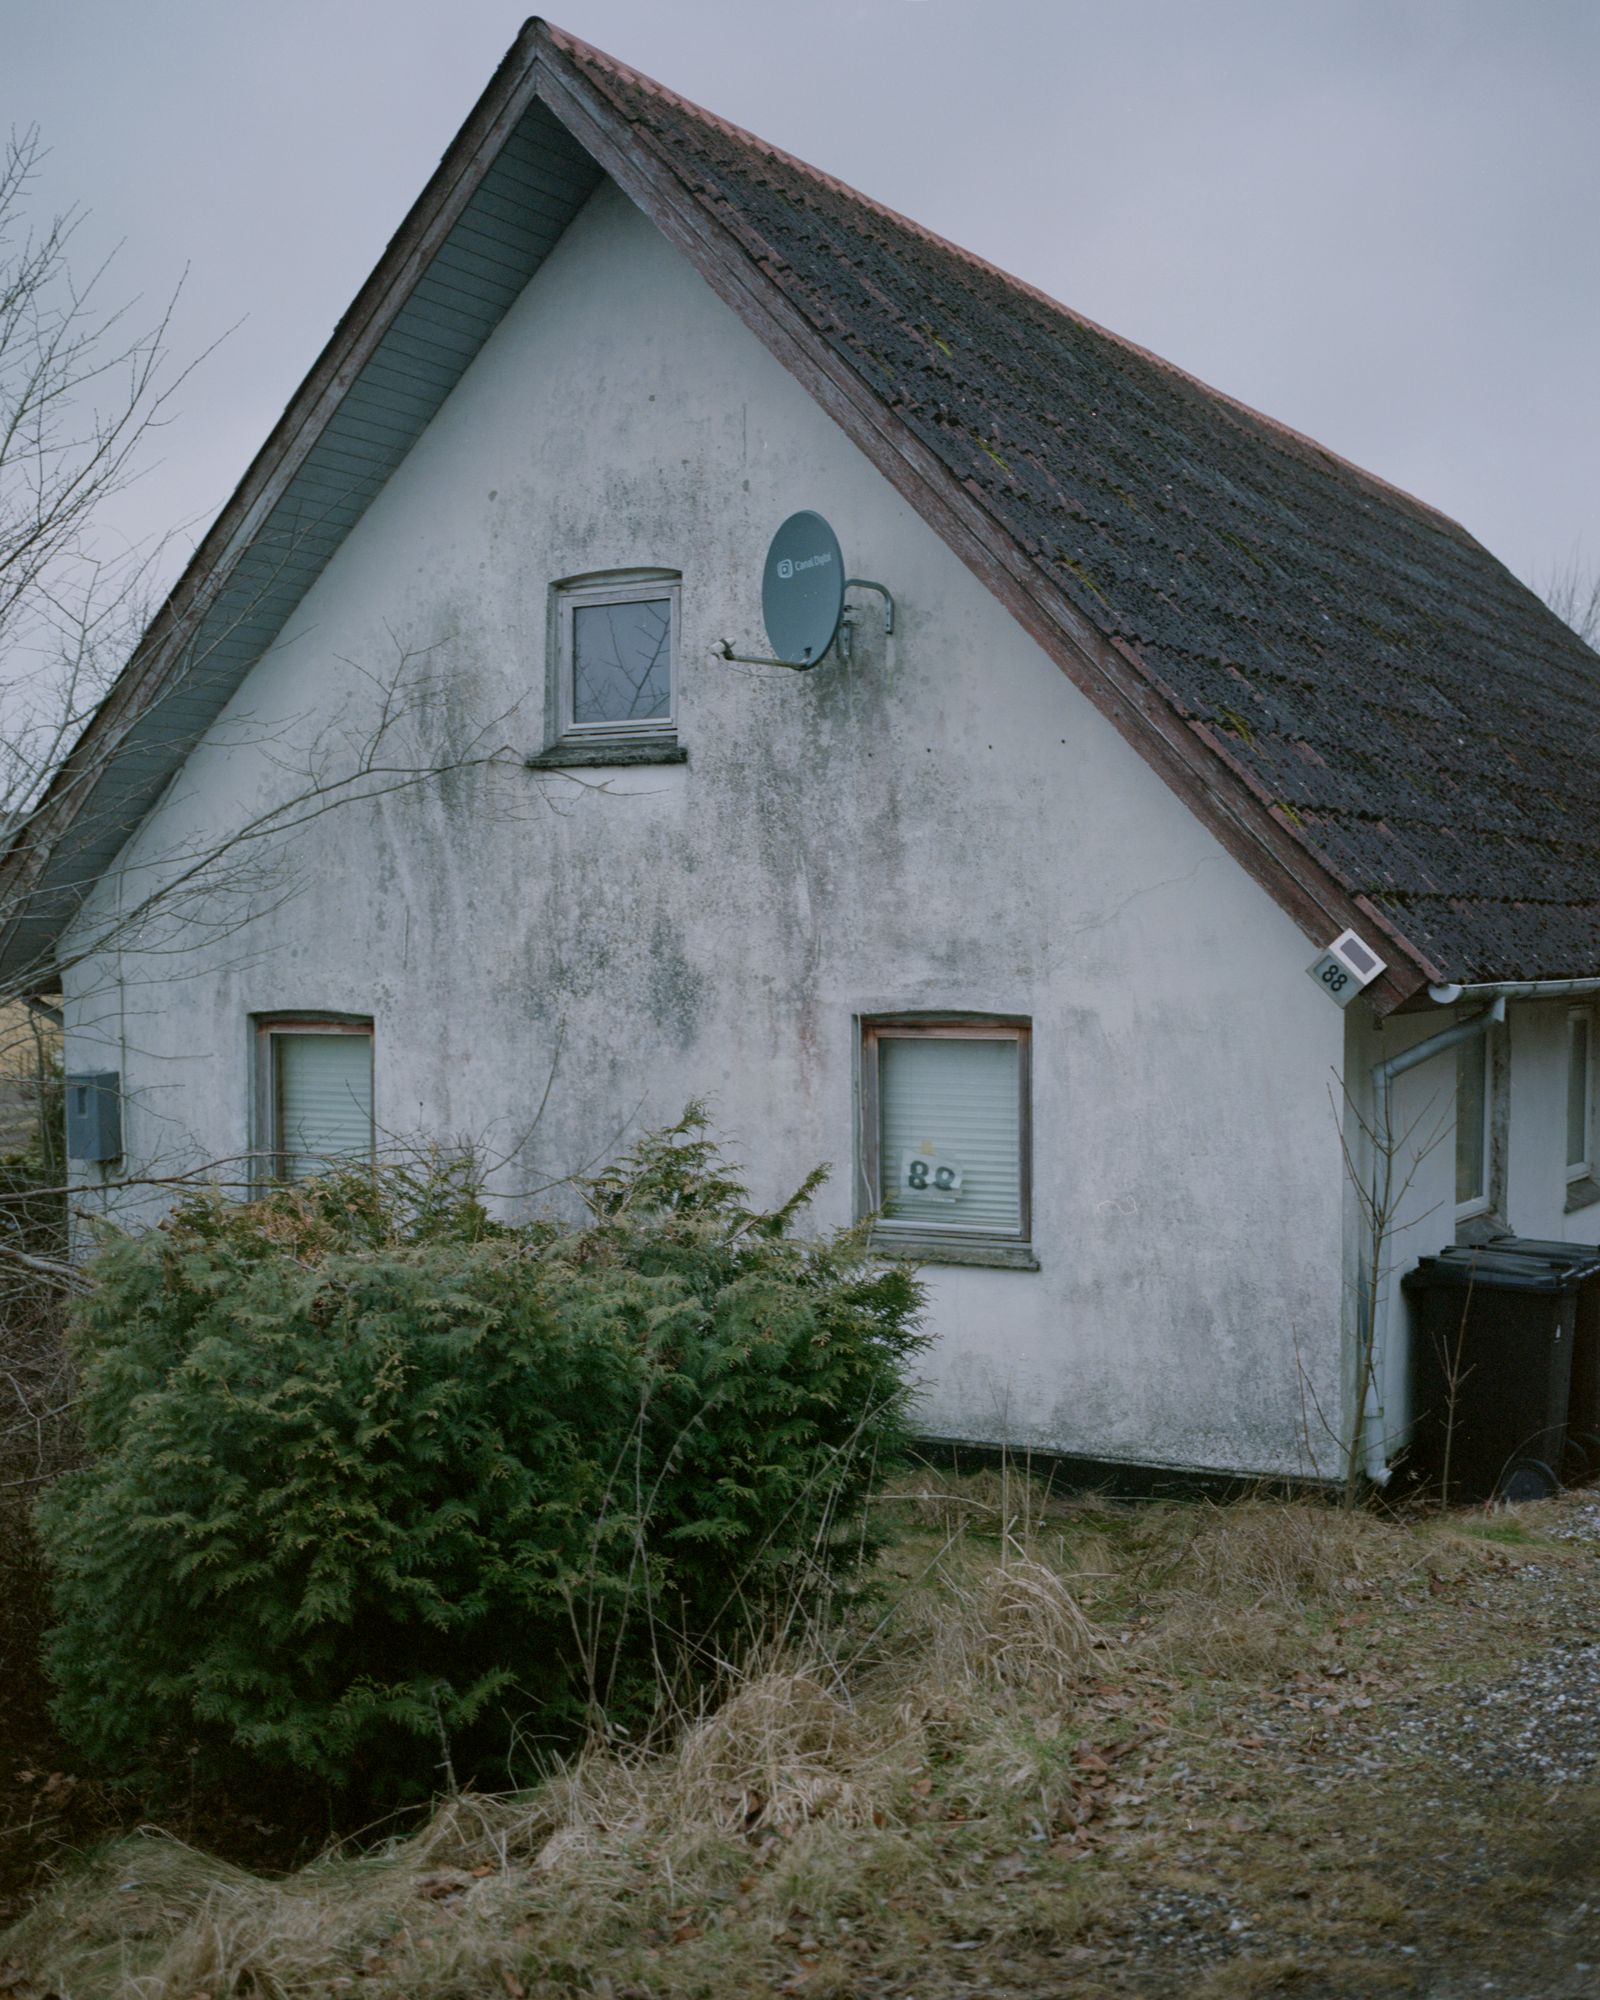 © Sarah Hartvigsen Juncker og Louise Herrche Serup - Image from the You still don't know my name photography project